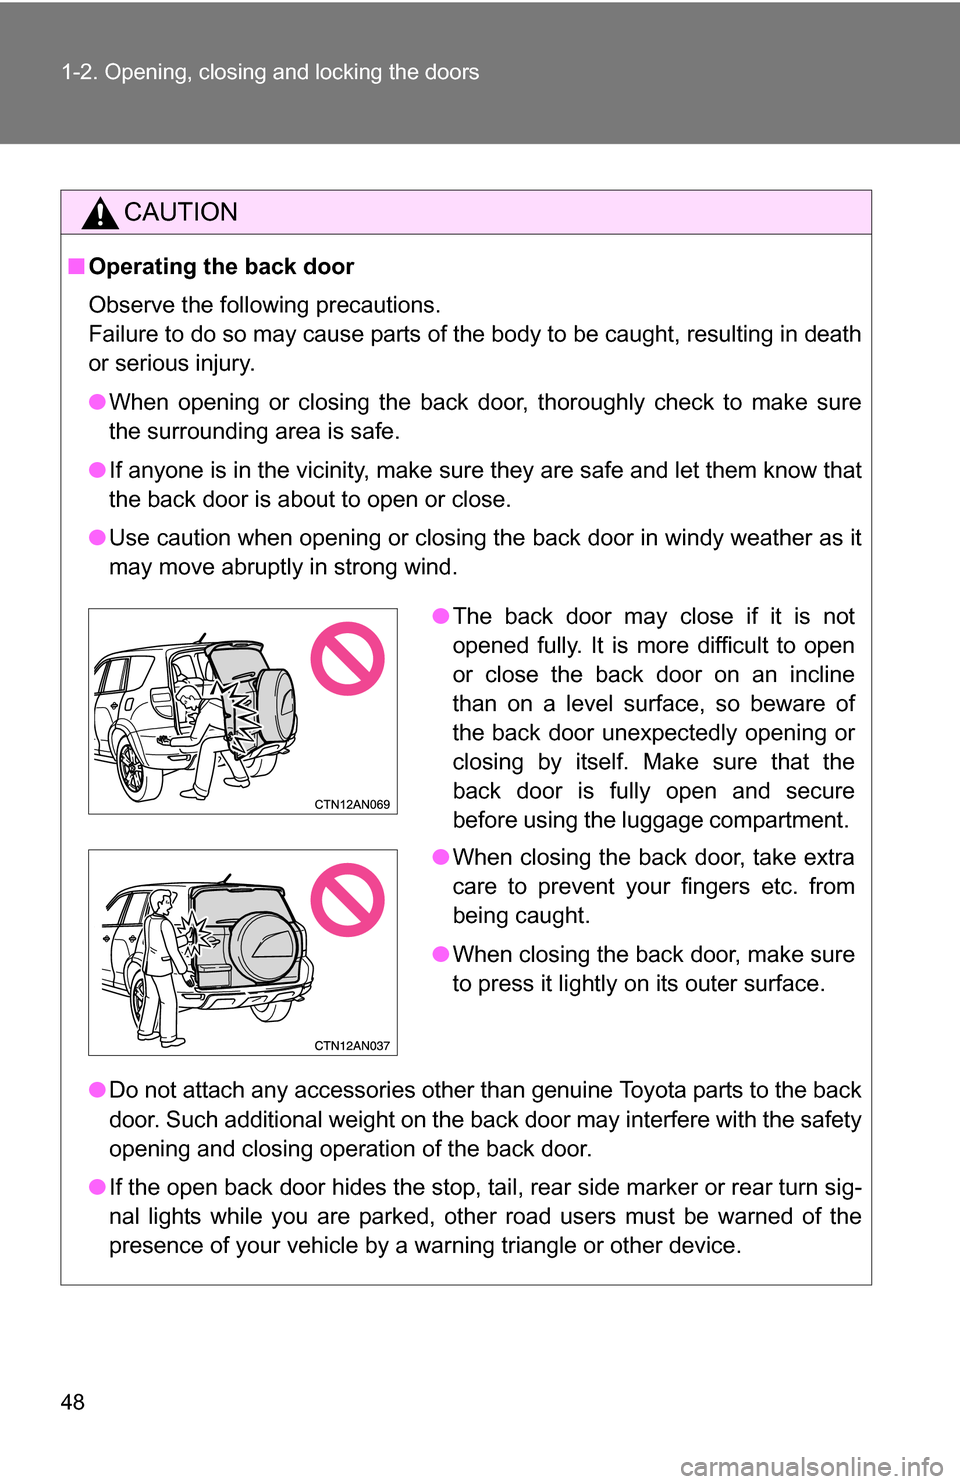 TOYOTA RAV4 2012 XA30 / 3.G Owners Manual 48 1-2. Opening, closing and locking the doors
CAUTION
■Operating the back door
Observe the following precautions.
Failure to do so may cause parts of the body to be caught, resulting in death
or se